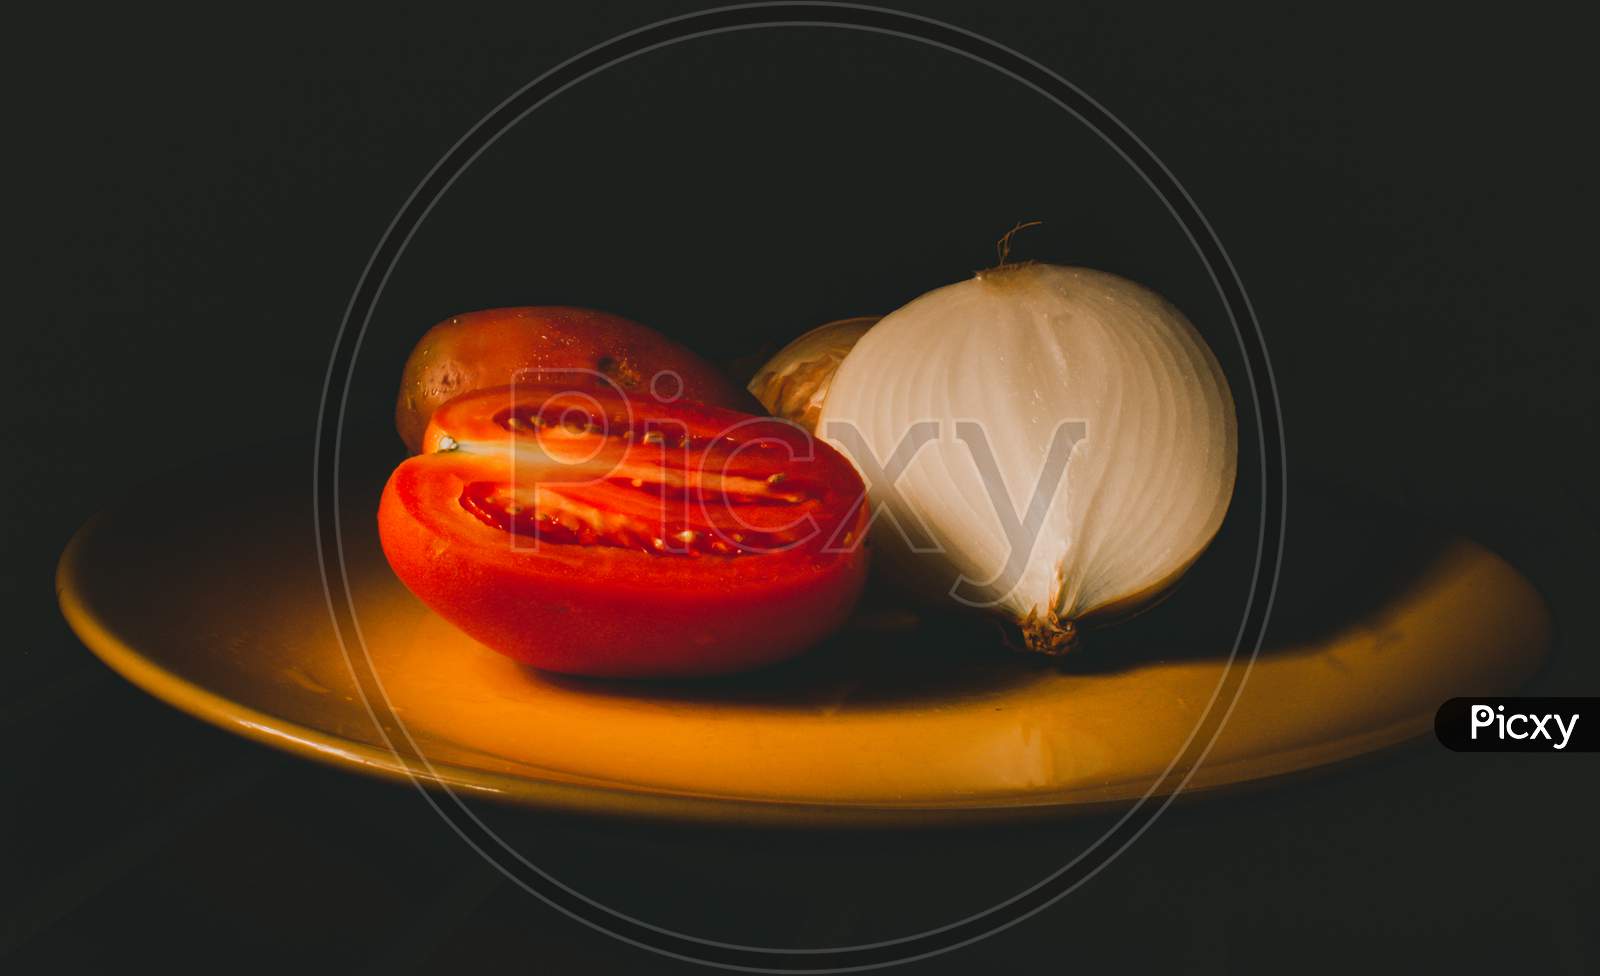 Tomatoes And Onions On A Yellow Plate. Still Life Effect Created With Light.